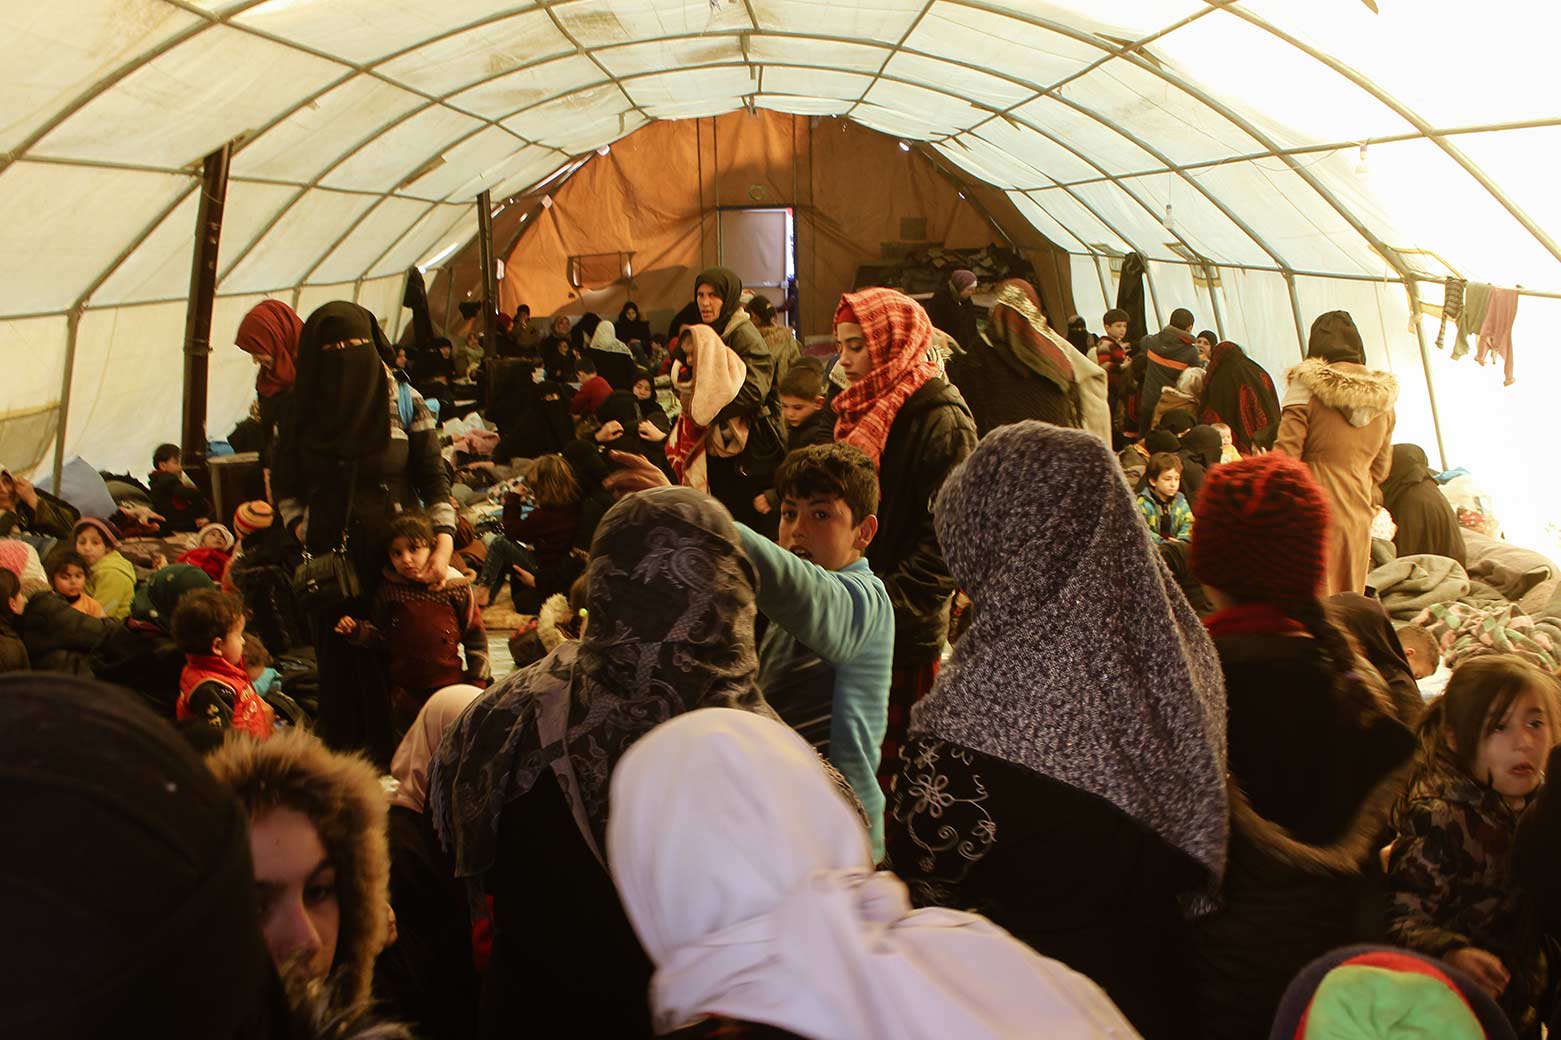 A tent being used as a community centre for families to receive aid